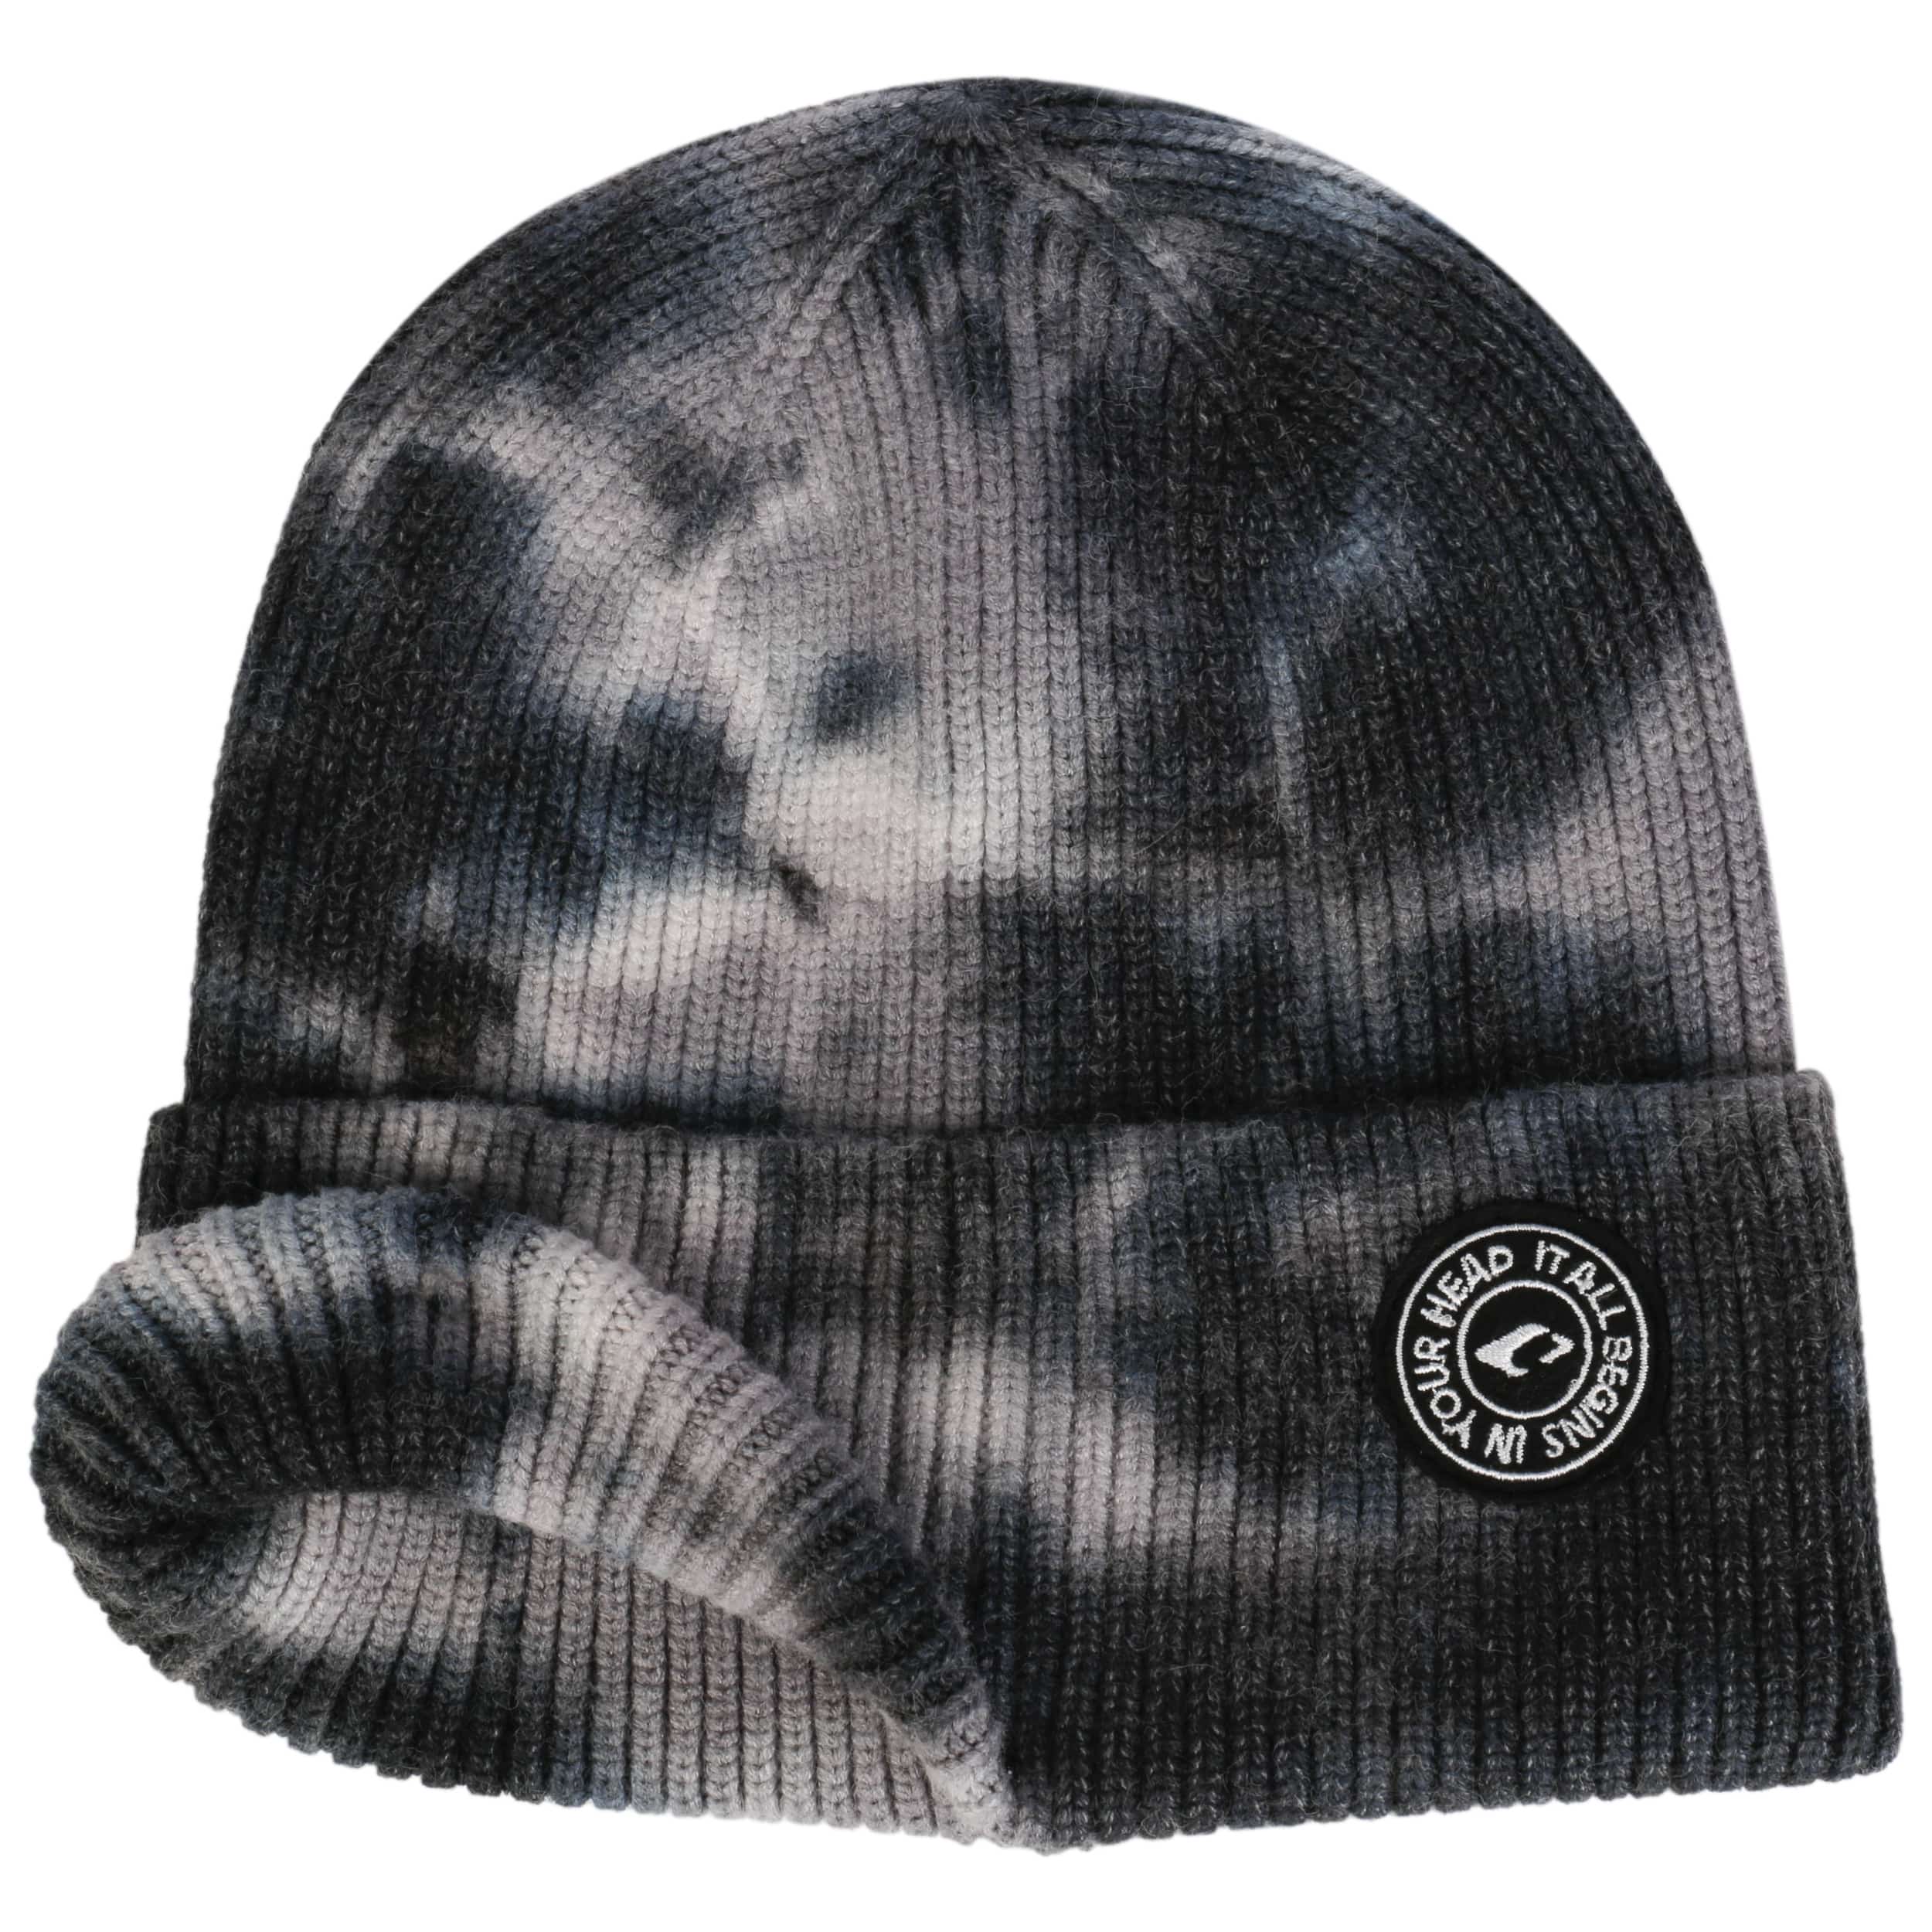 Yuna - Tie Dye Hat 28,95 € Beanie by Chillouts